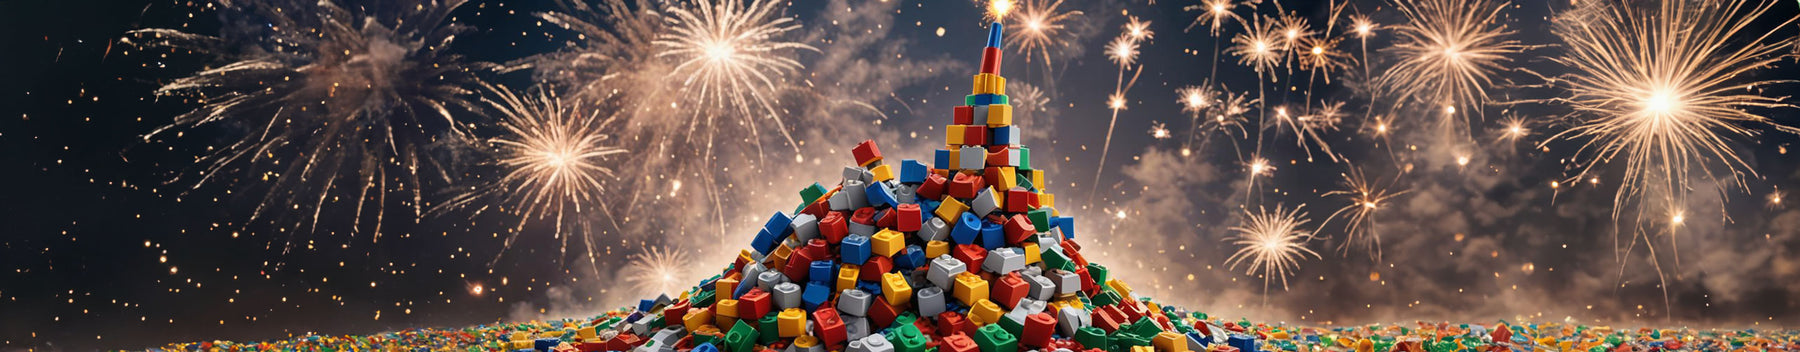 First Look at the LEGO Firework Celebrations Gift-With-Purchase Set